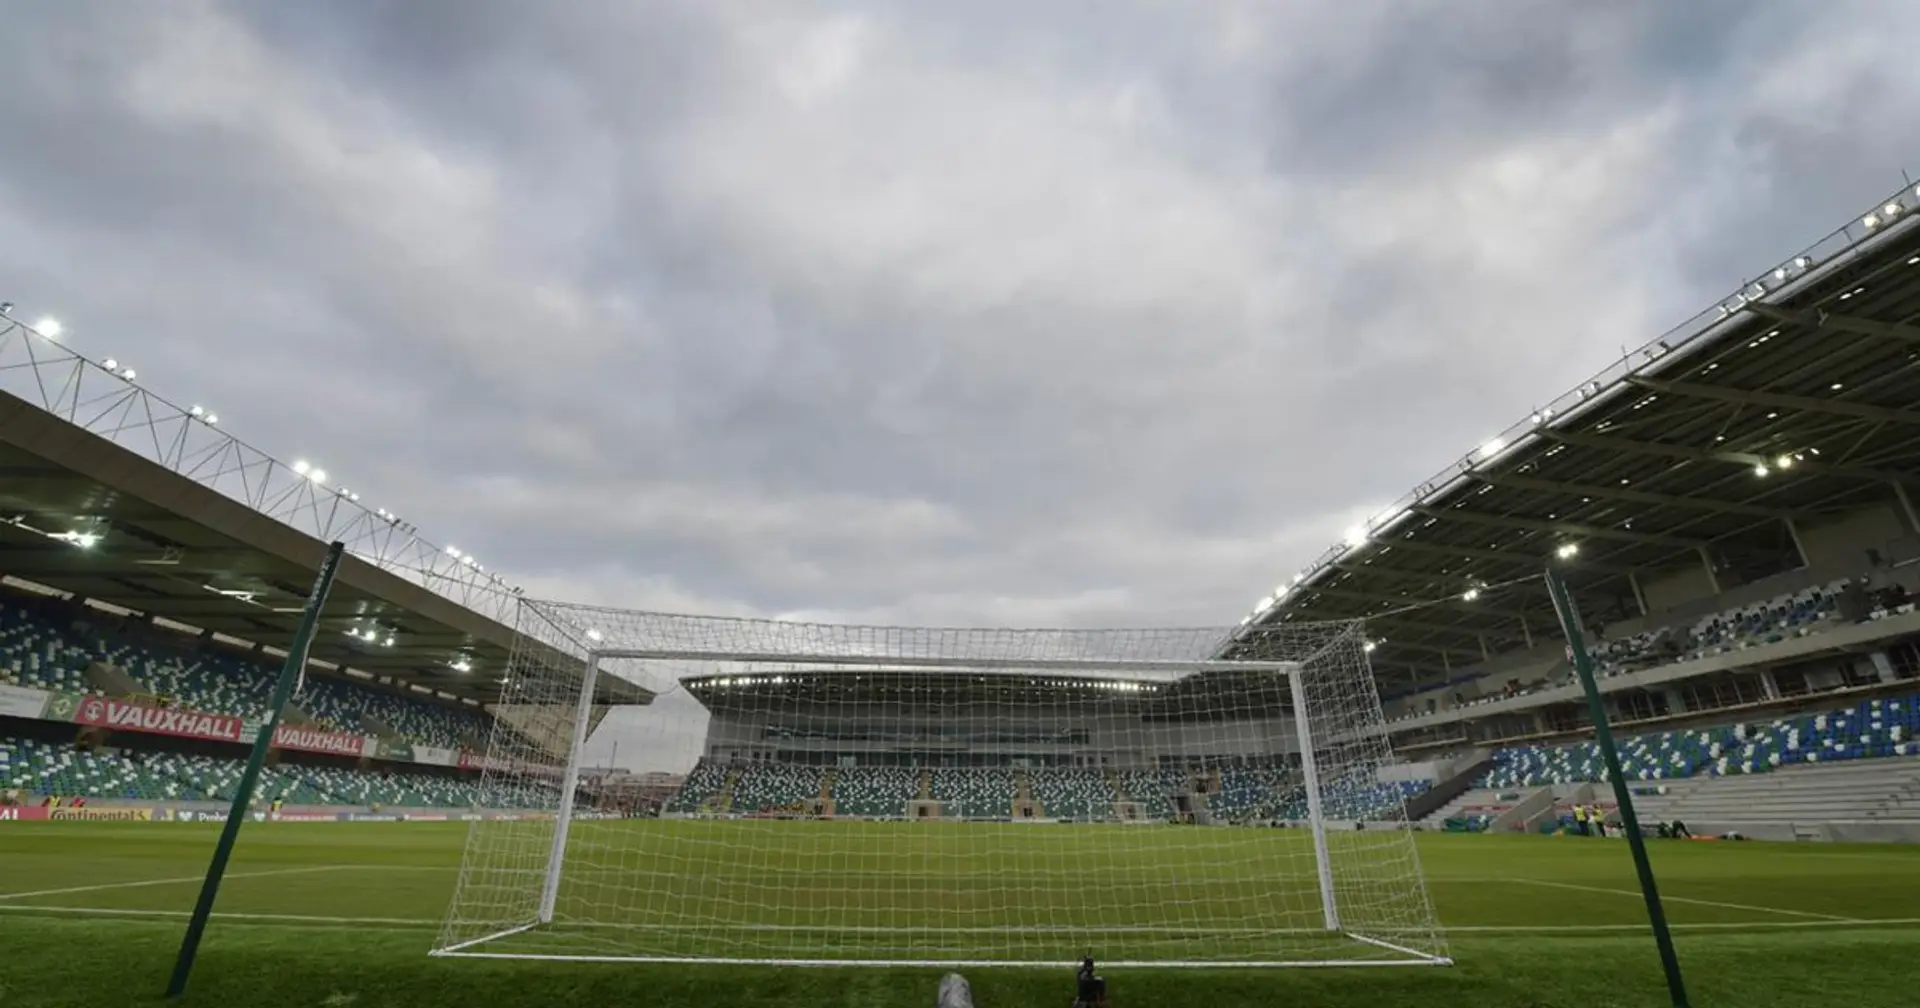 BBC: Irish Cup final set to be first game in UK with fans in attendance since March